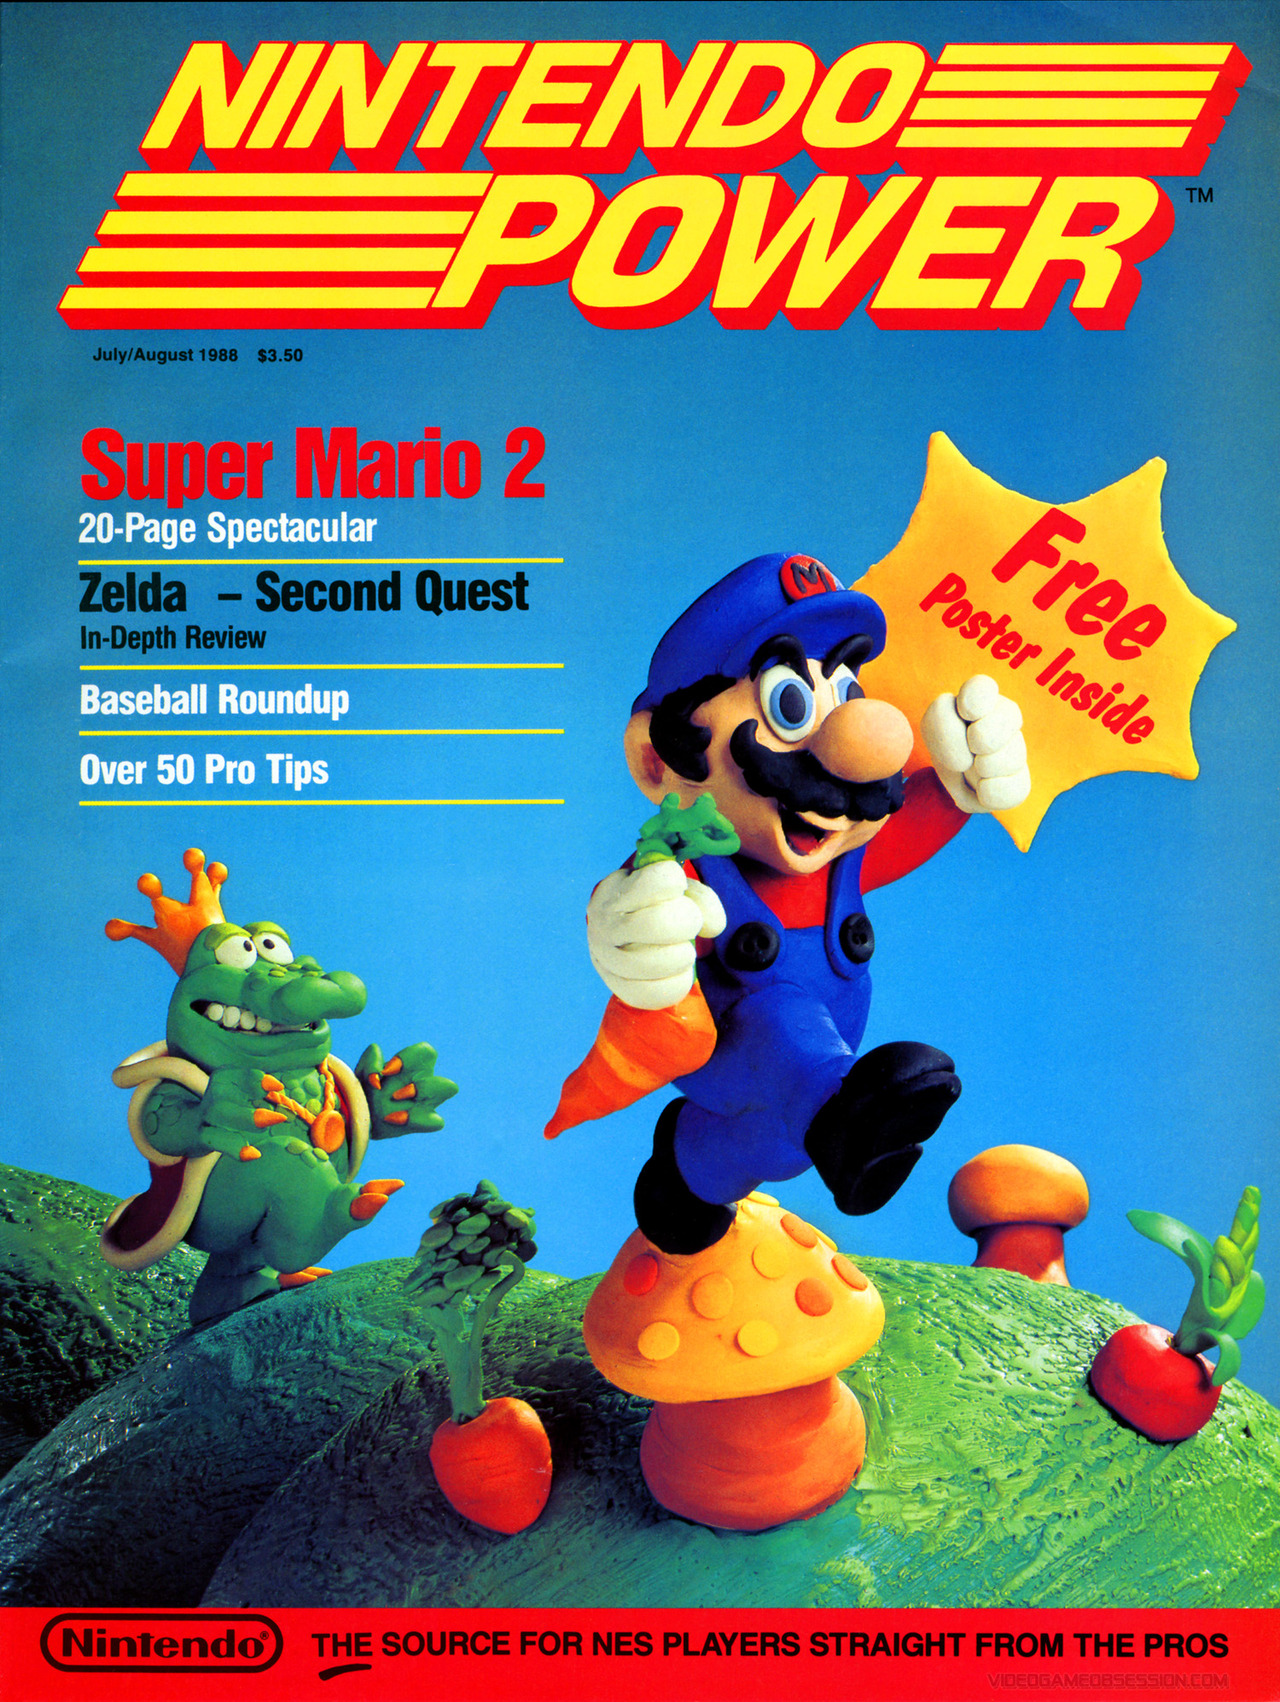 The first issue of Nintendo Power, dated from July/August 1988, features Super Mario Bros. 2 on its cover.